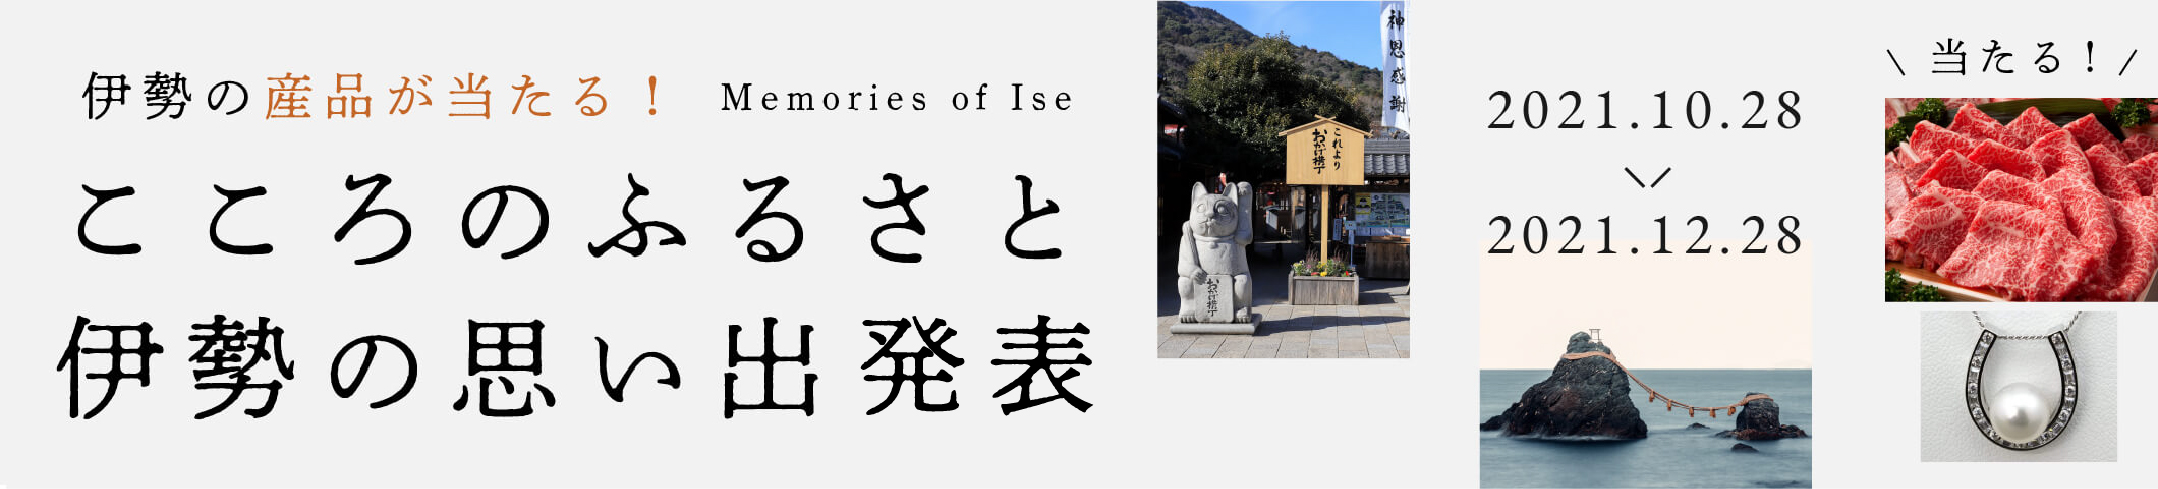 Recruitment of memories of Ise, the hometown of the heart